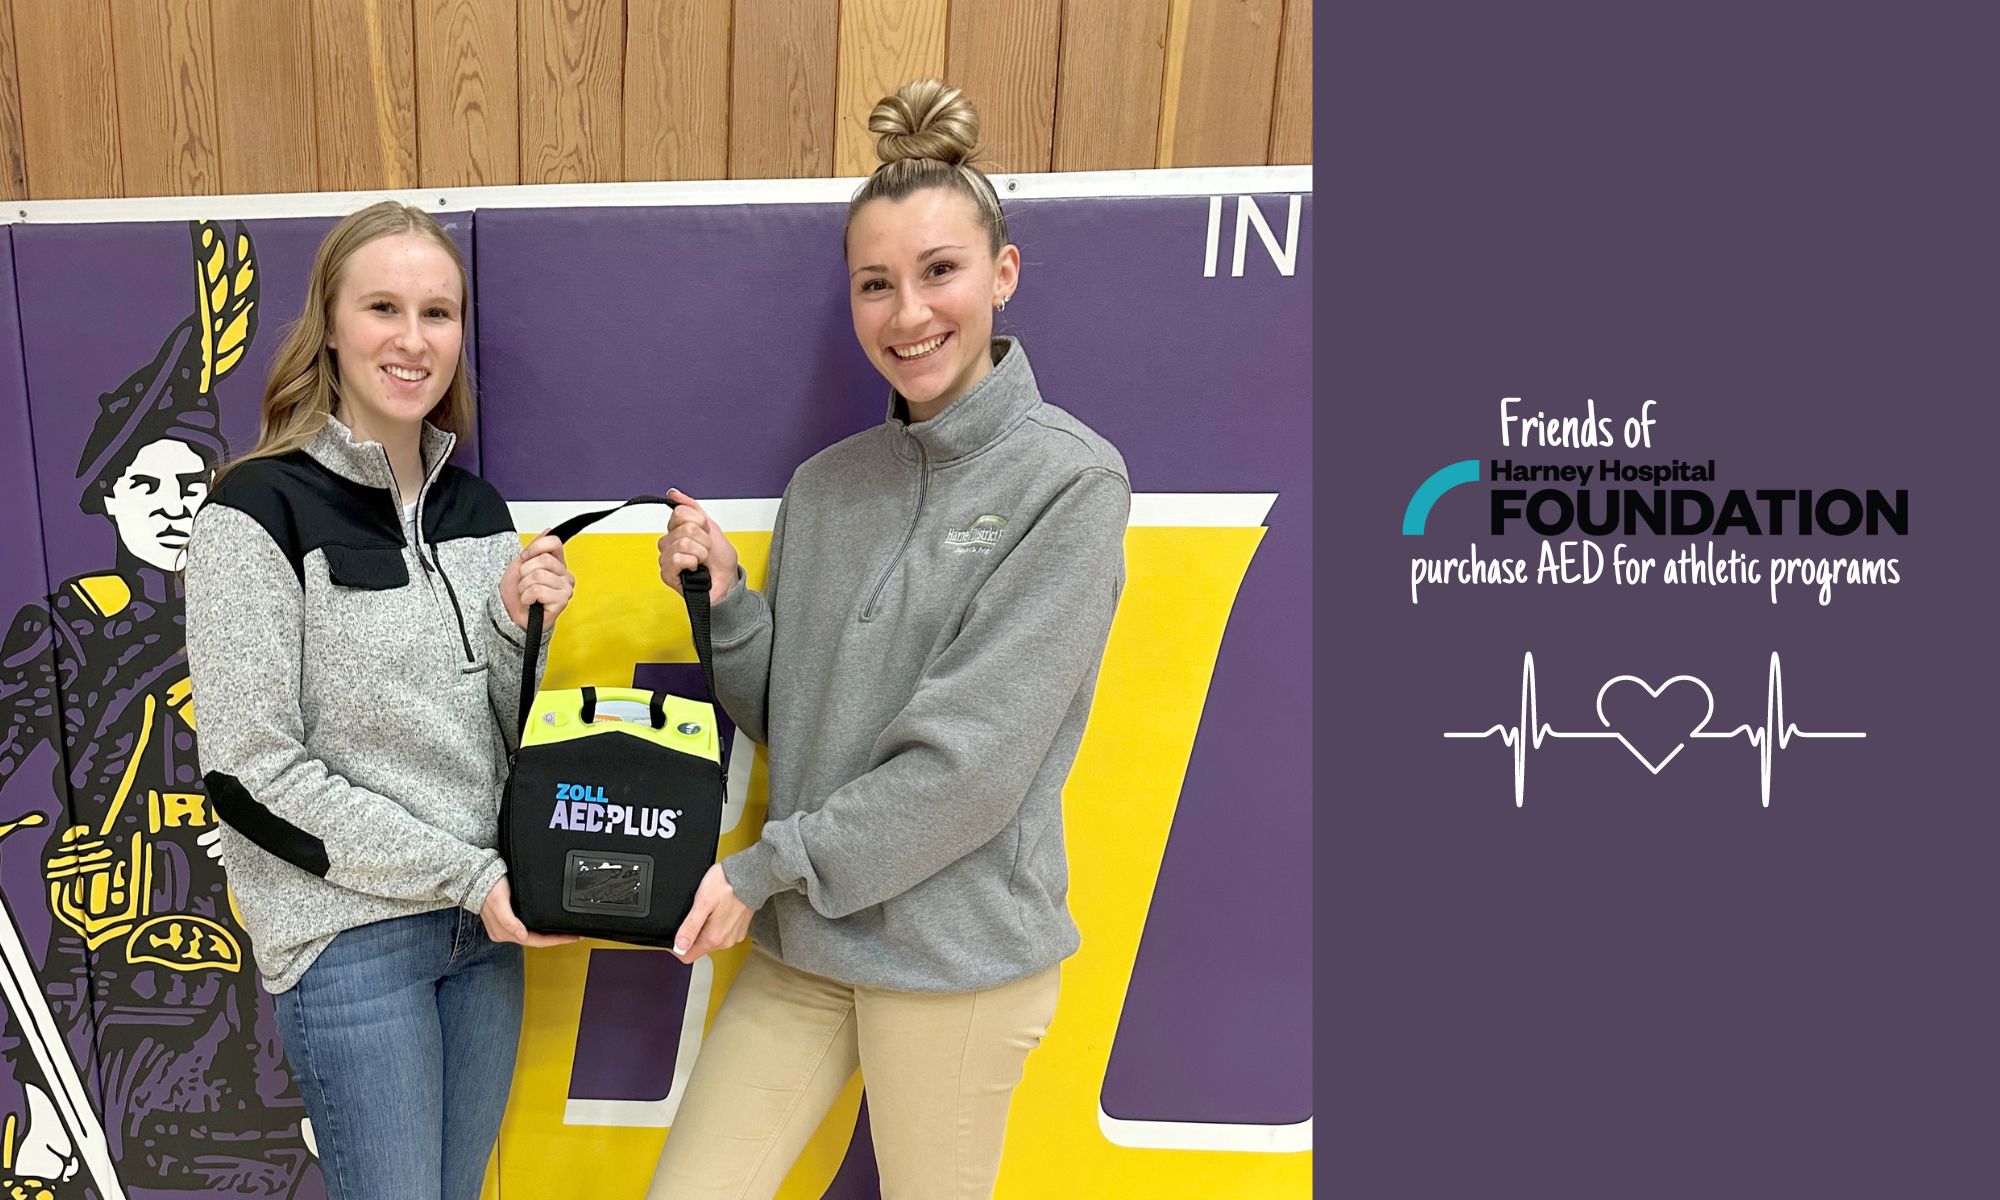 Tall, blonde teenage girl and tall, blonde young woman pose with an AED machine in the Burns High School gym.